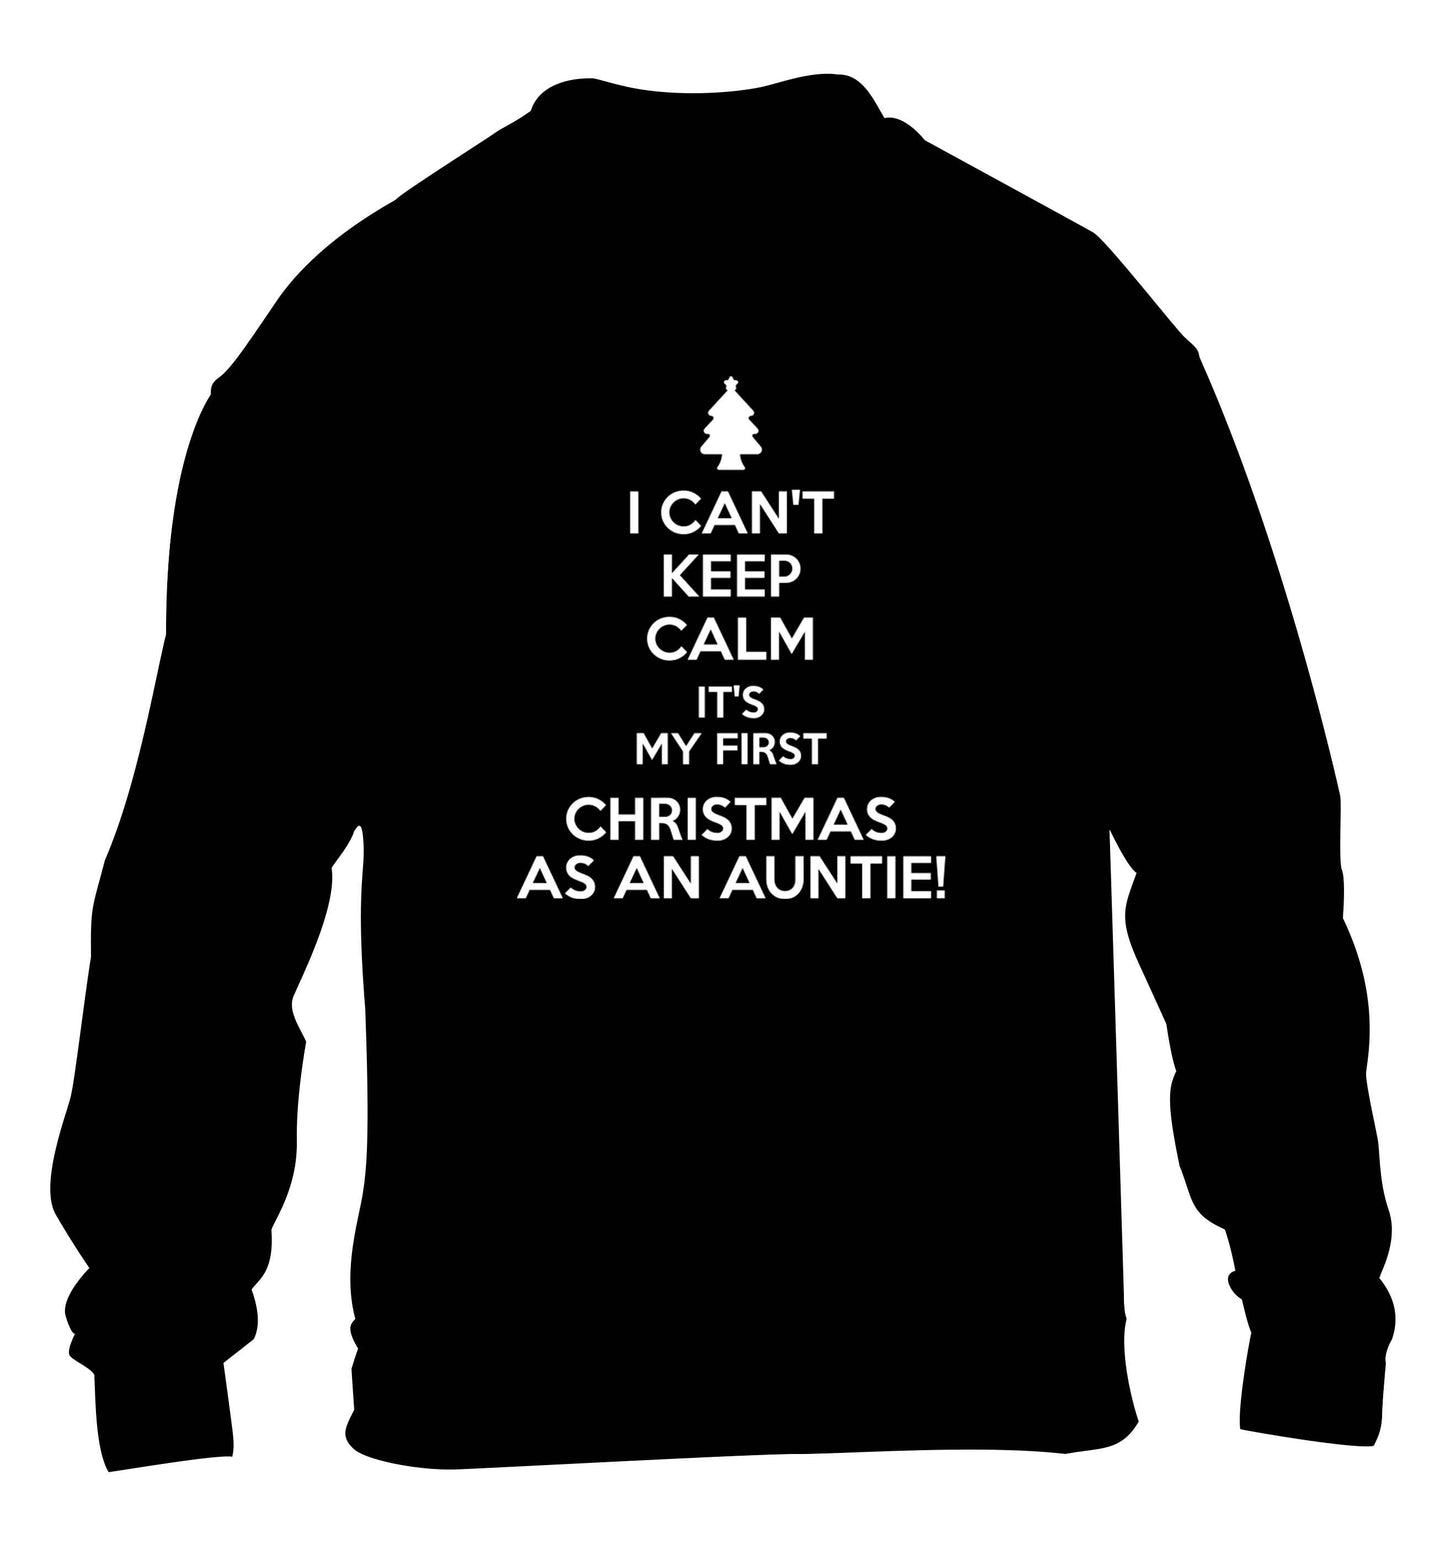 I can't keep calm it's my first Christmas as an auntie! children's black sweater 12-13 Years